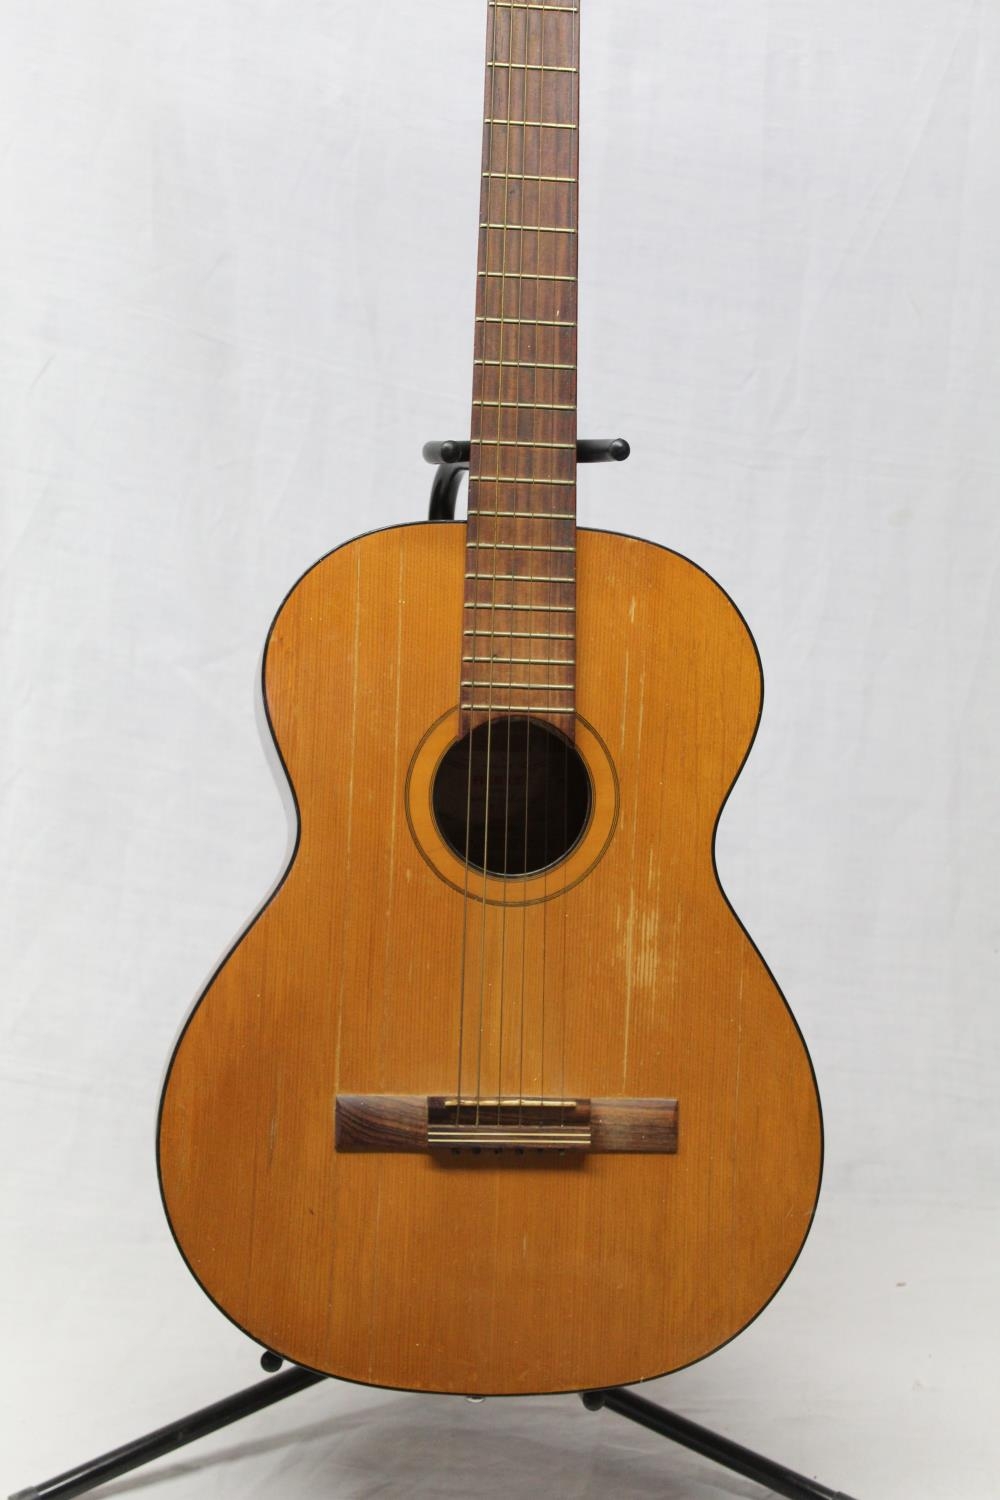 Classics Spanish six string acoustic guitar by Hertz Co Germany